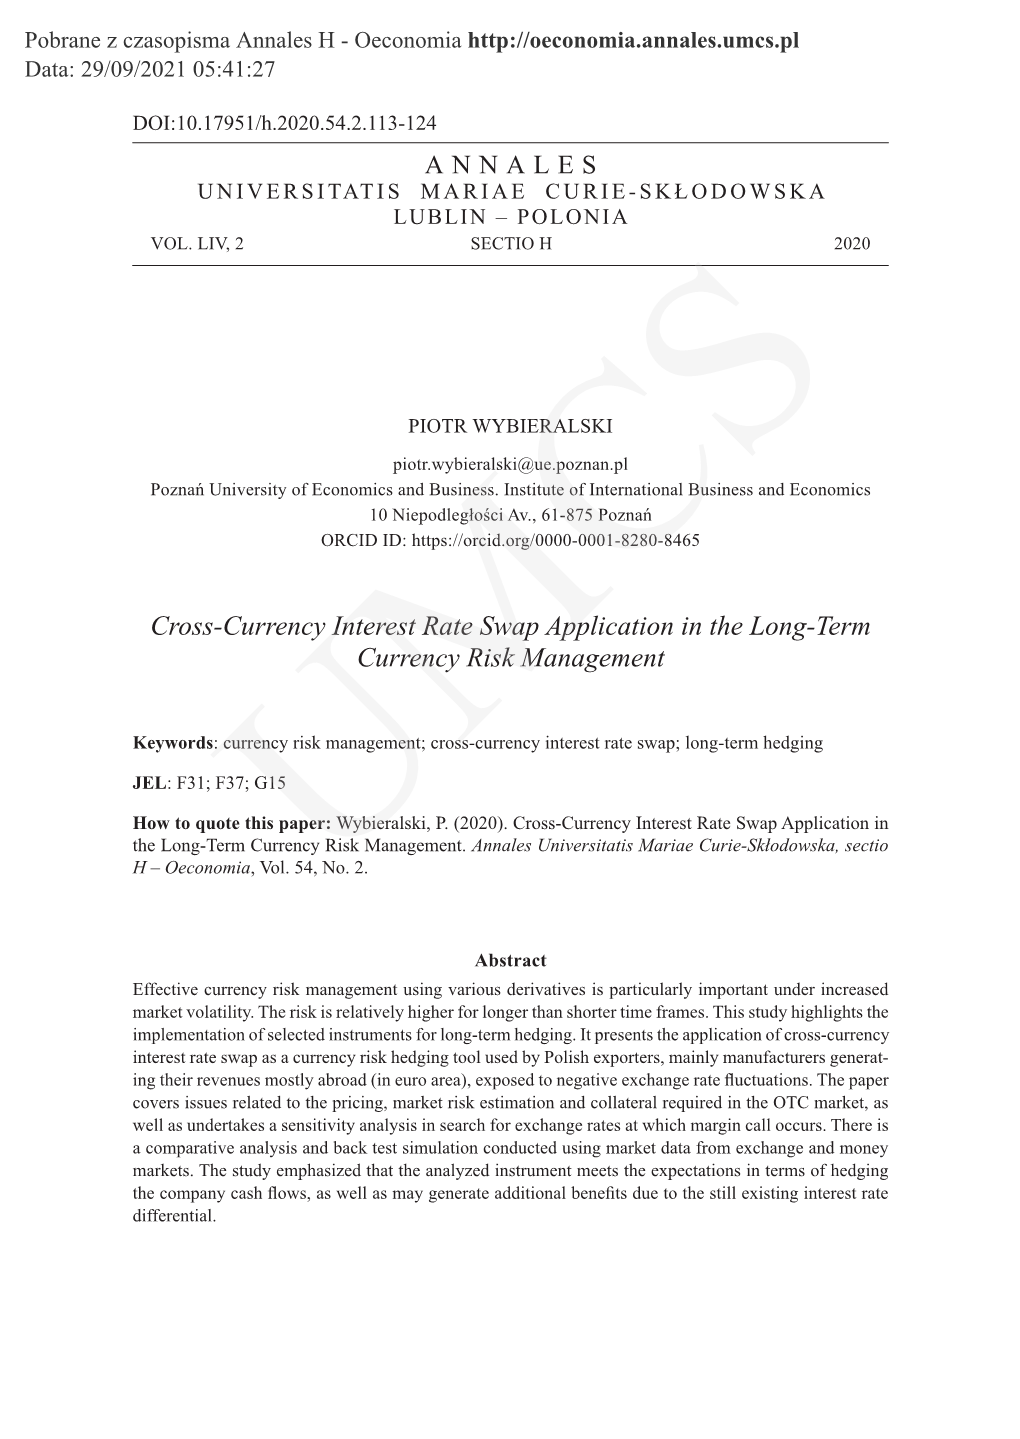 Cross-Currency Interest Rate Swap Application in the Long-Term Currency Risk Management